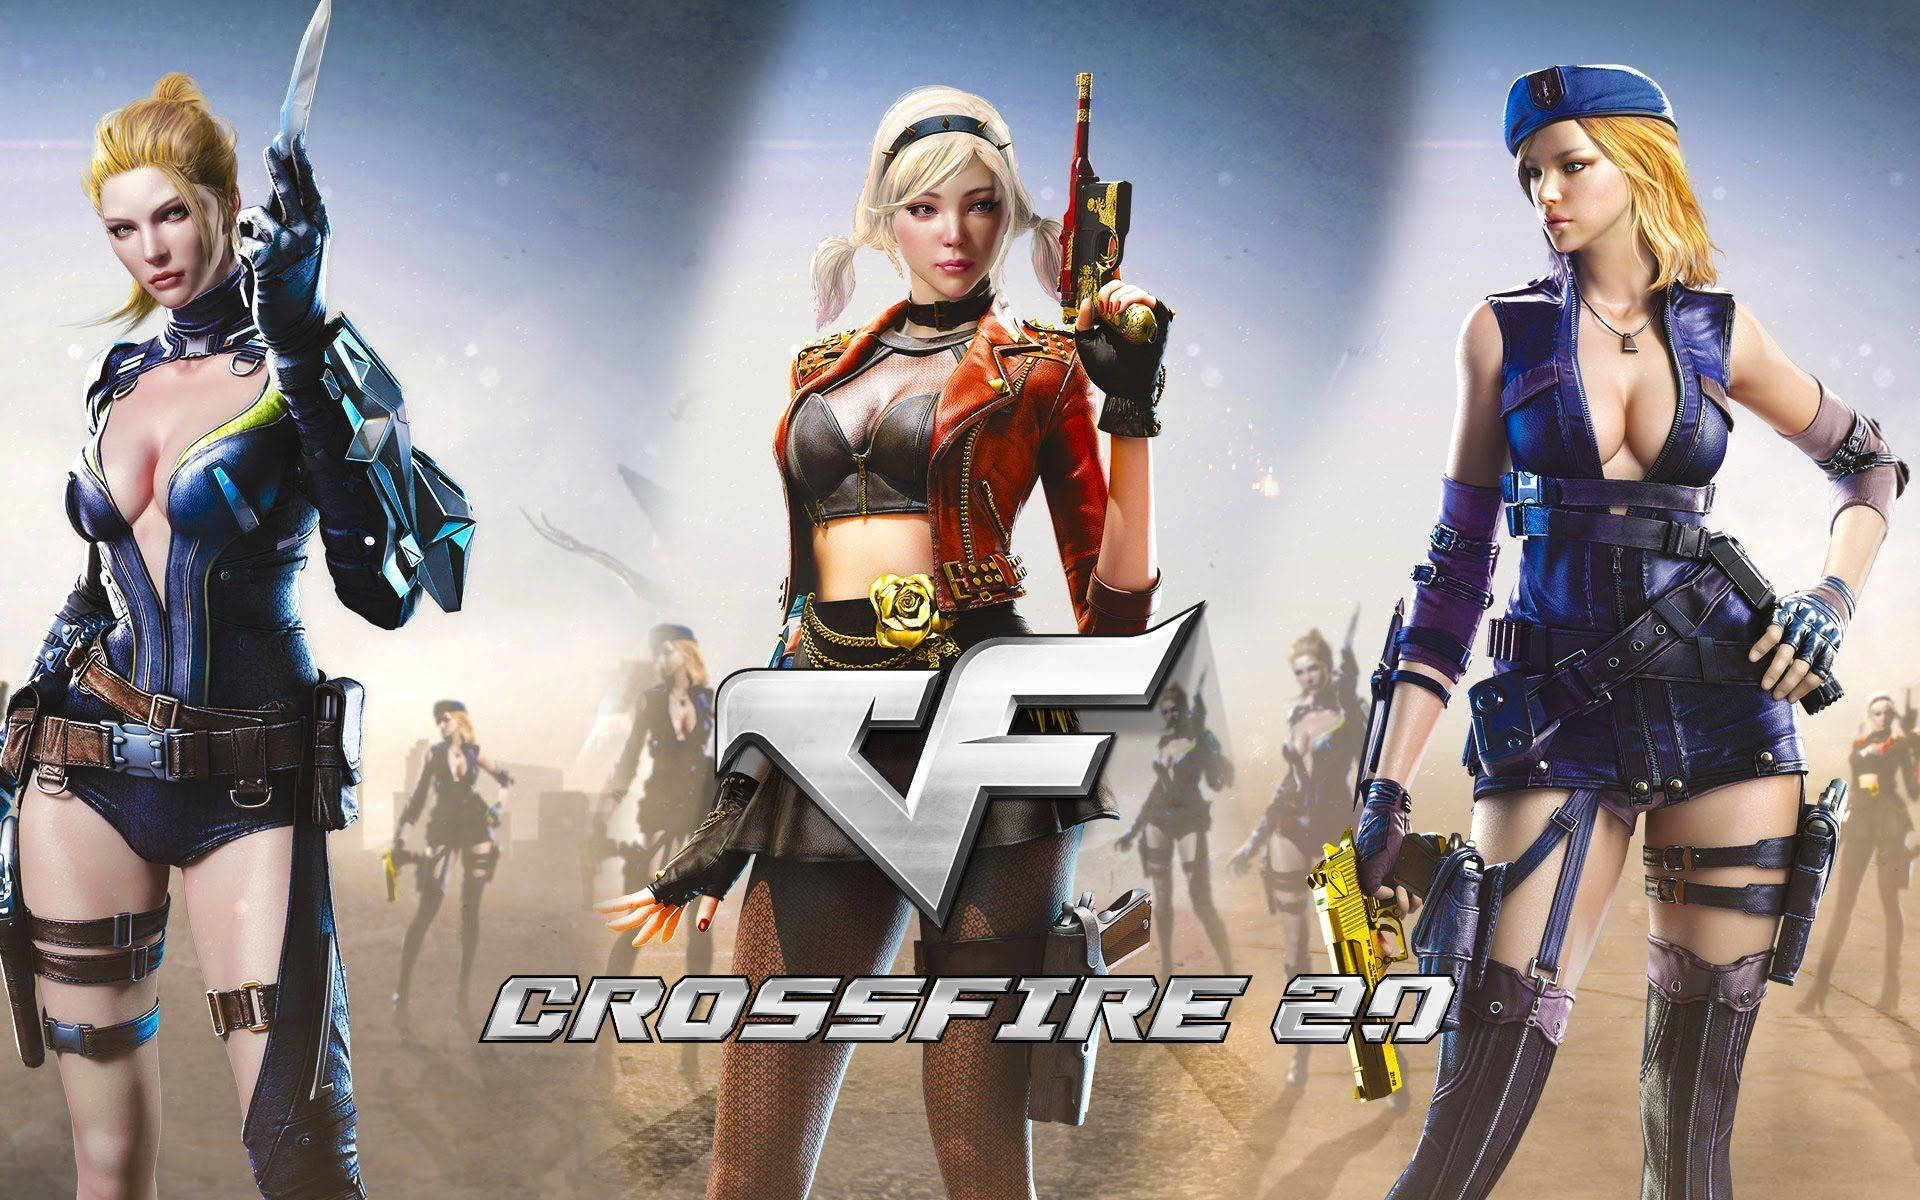 Crossfire 2.0 Viper Characters Background